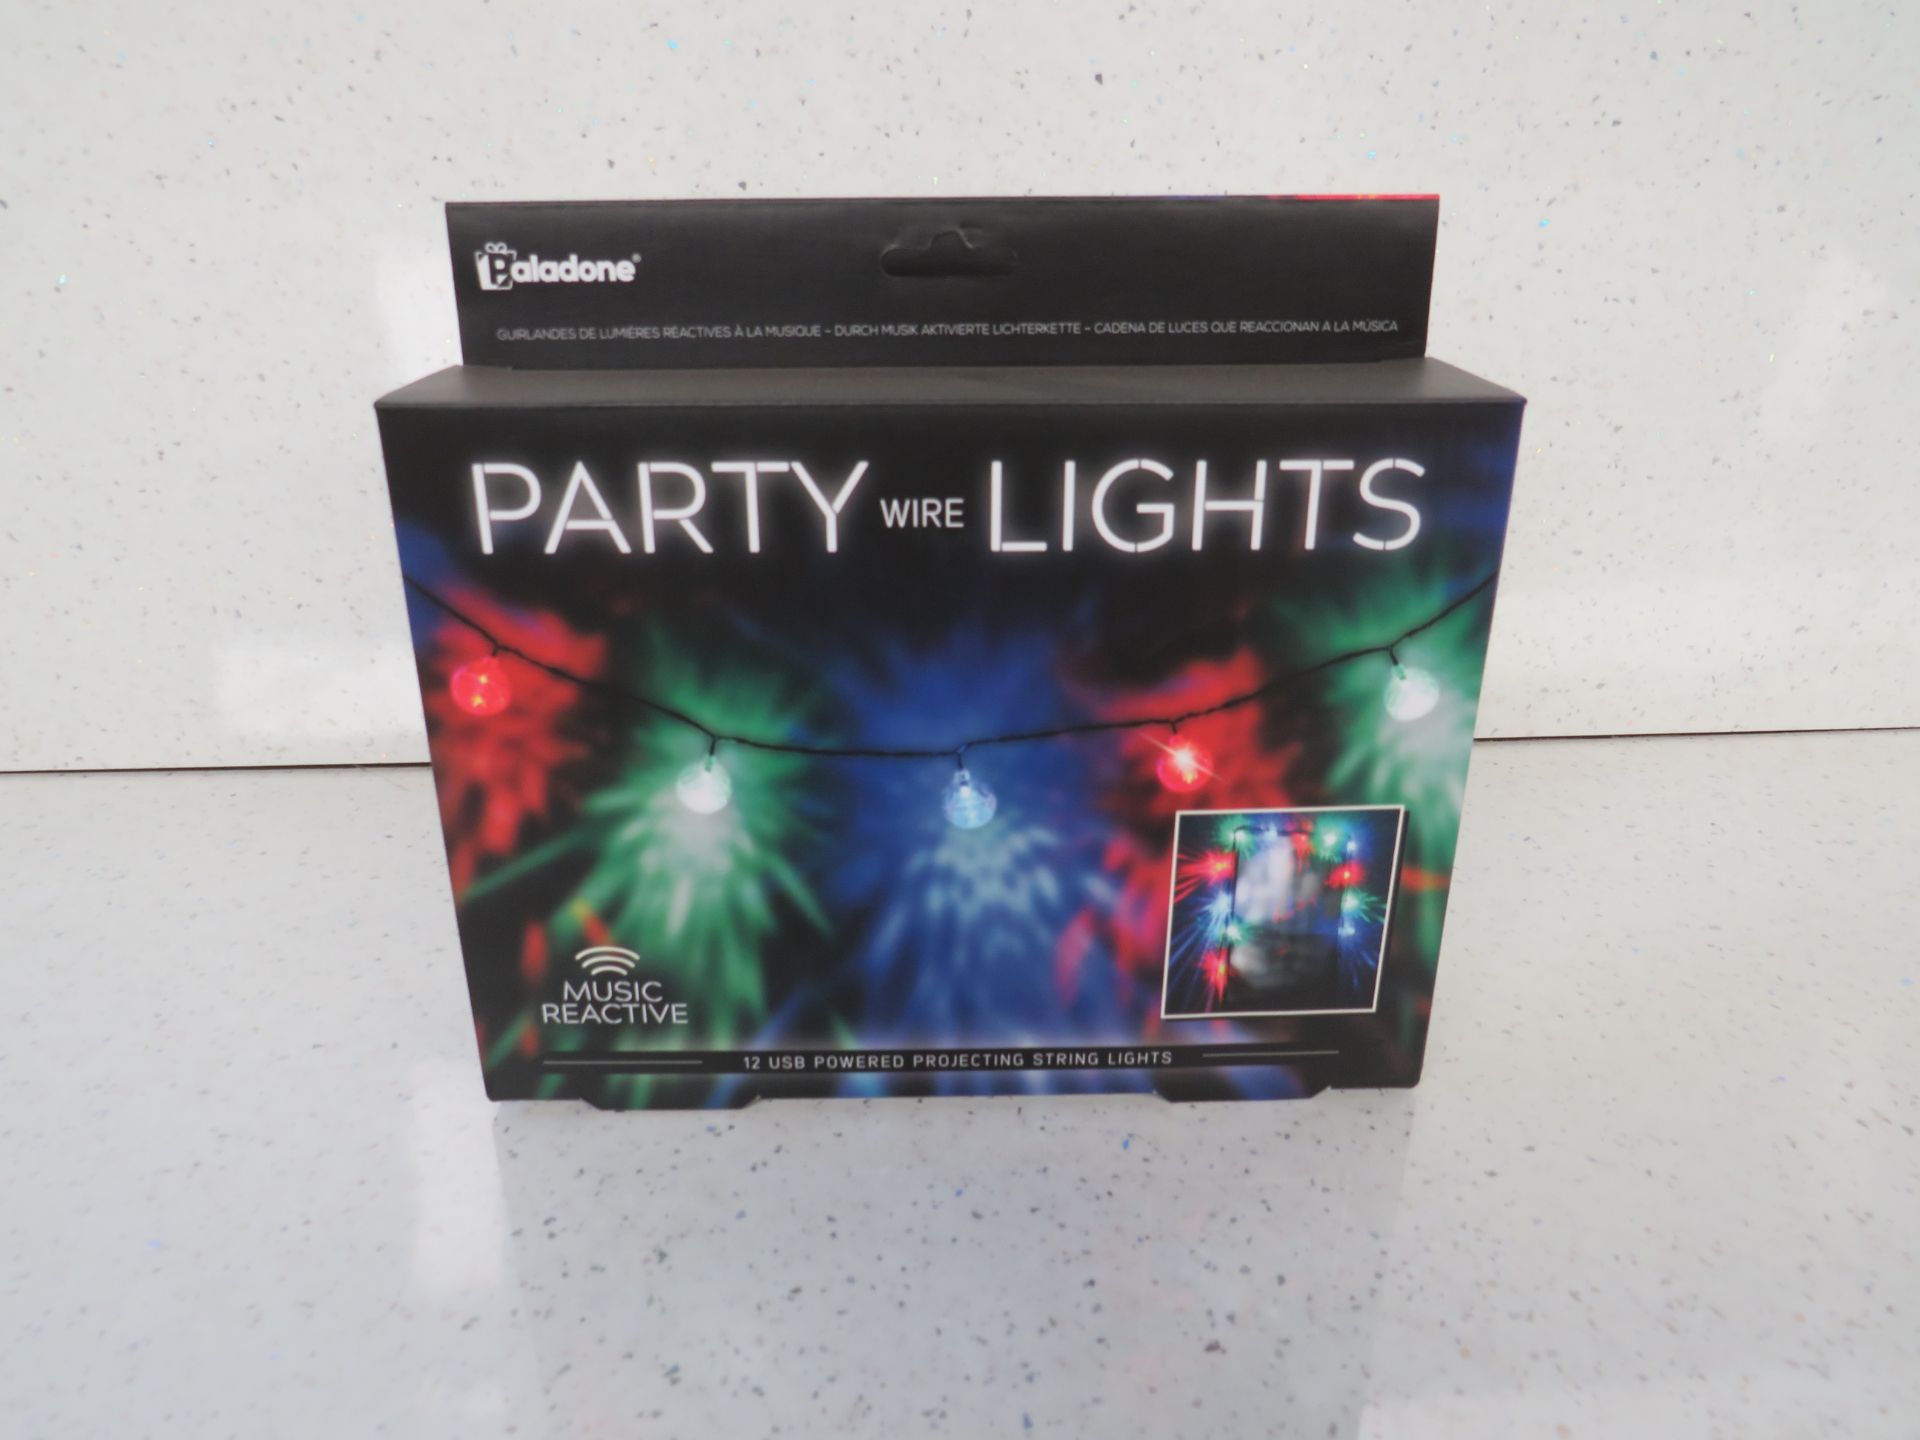 2x Paladone - Music Reactive 12-USB Powered Projecting String Lights - Unused & Boxed.